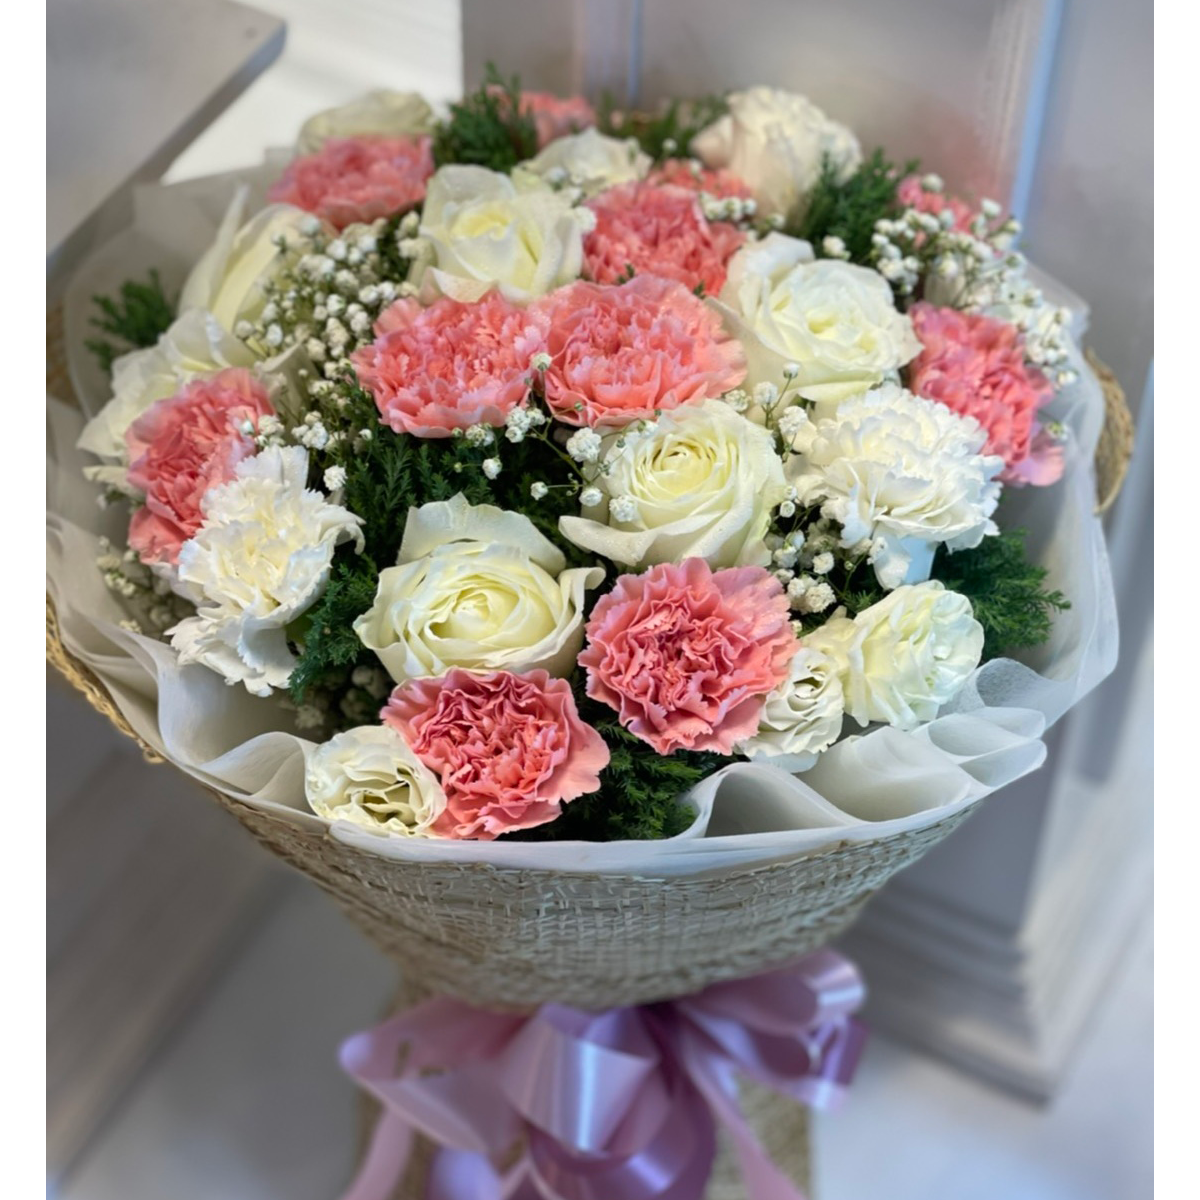 Girly Bouquet Of Roses, Carnation And Caspia